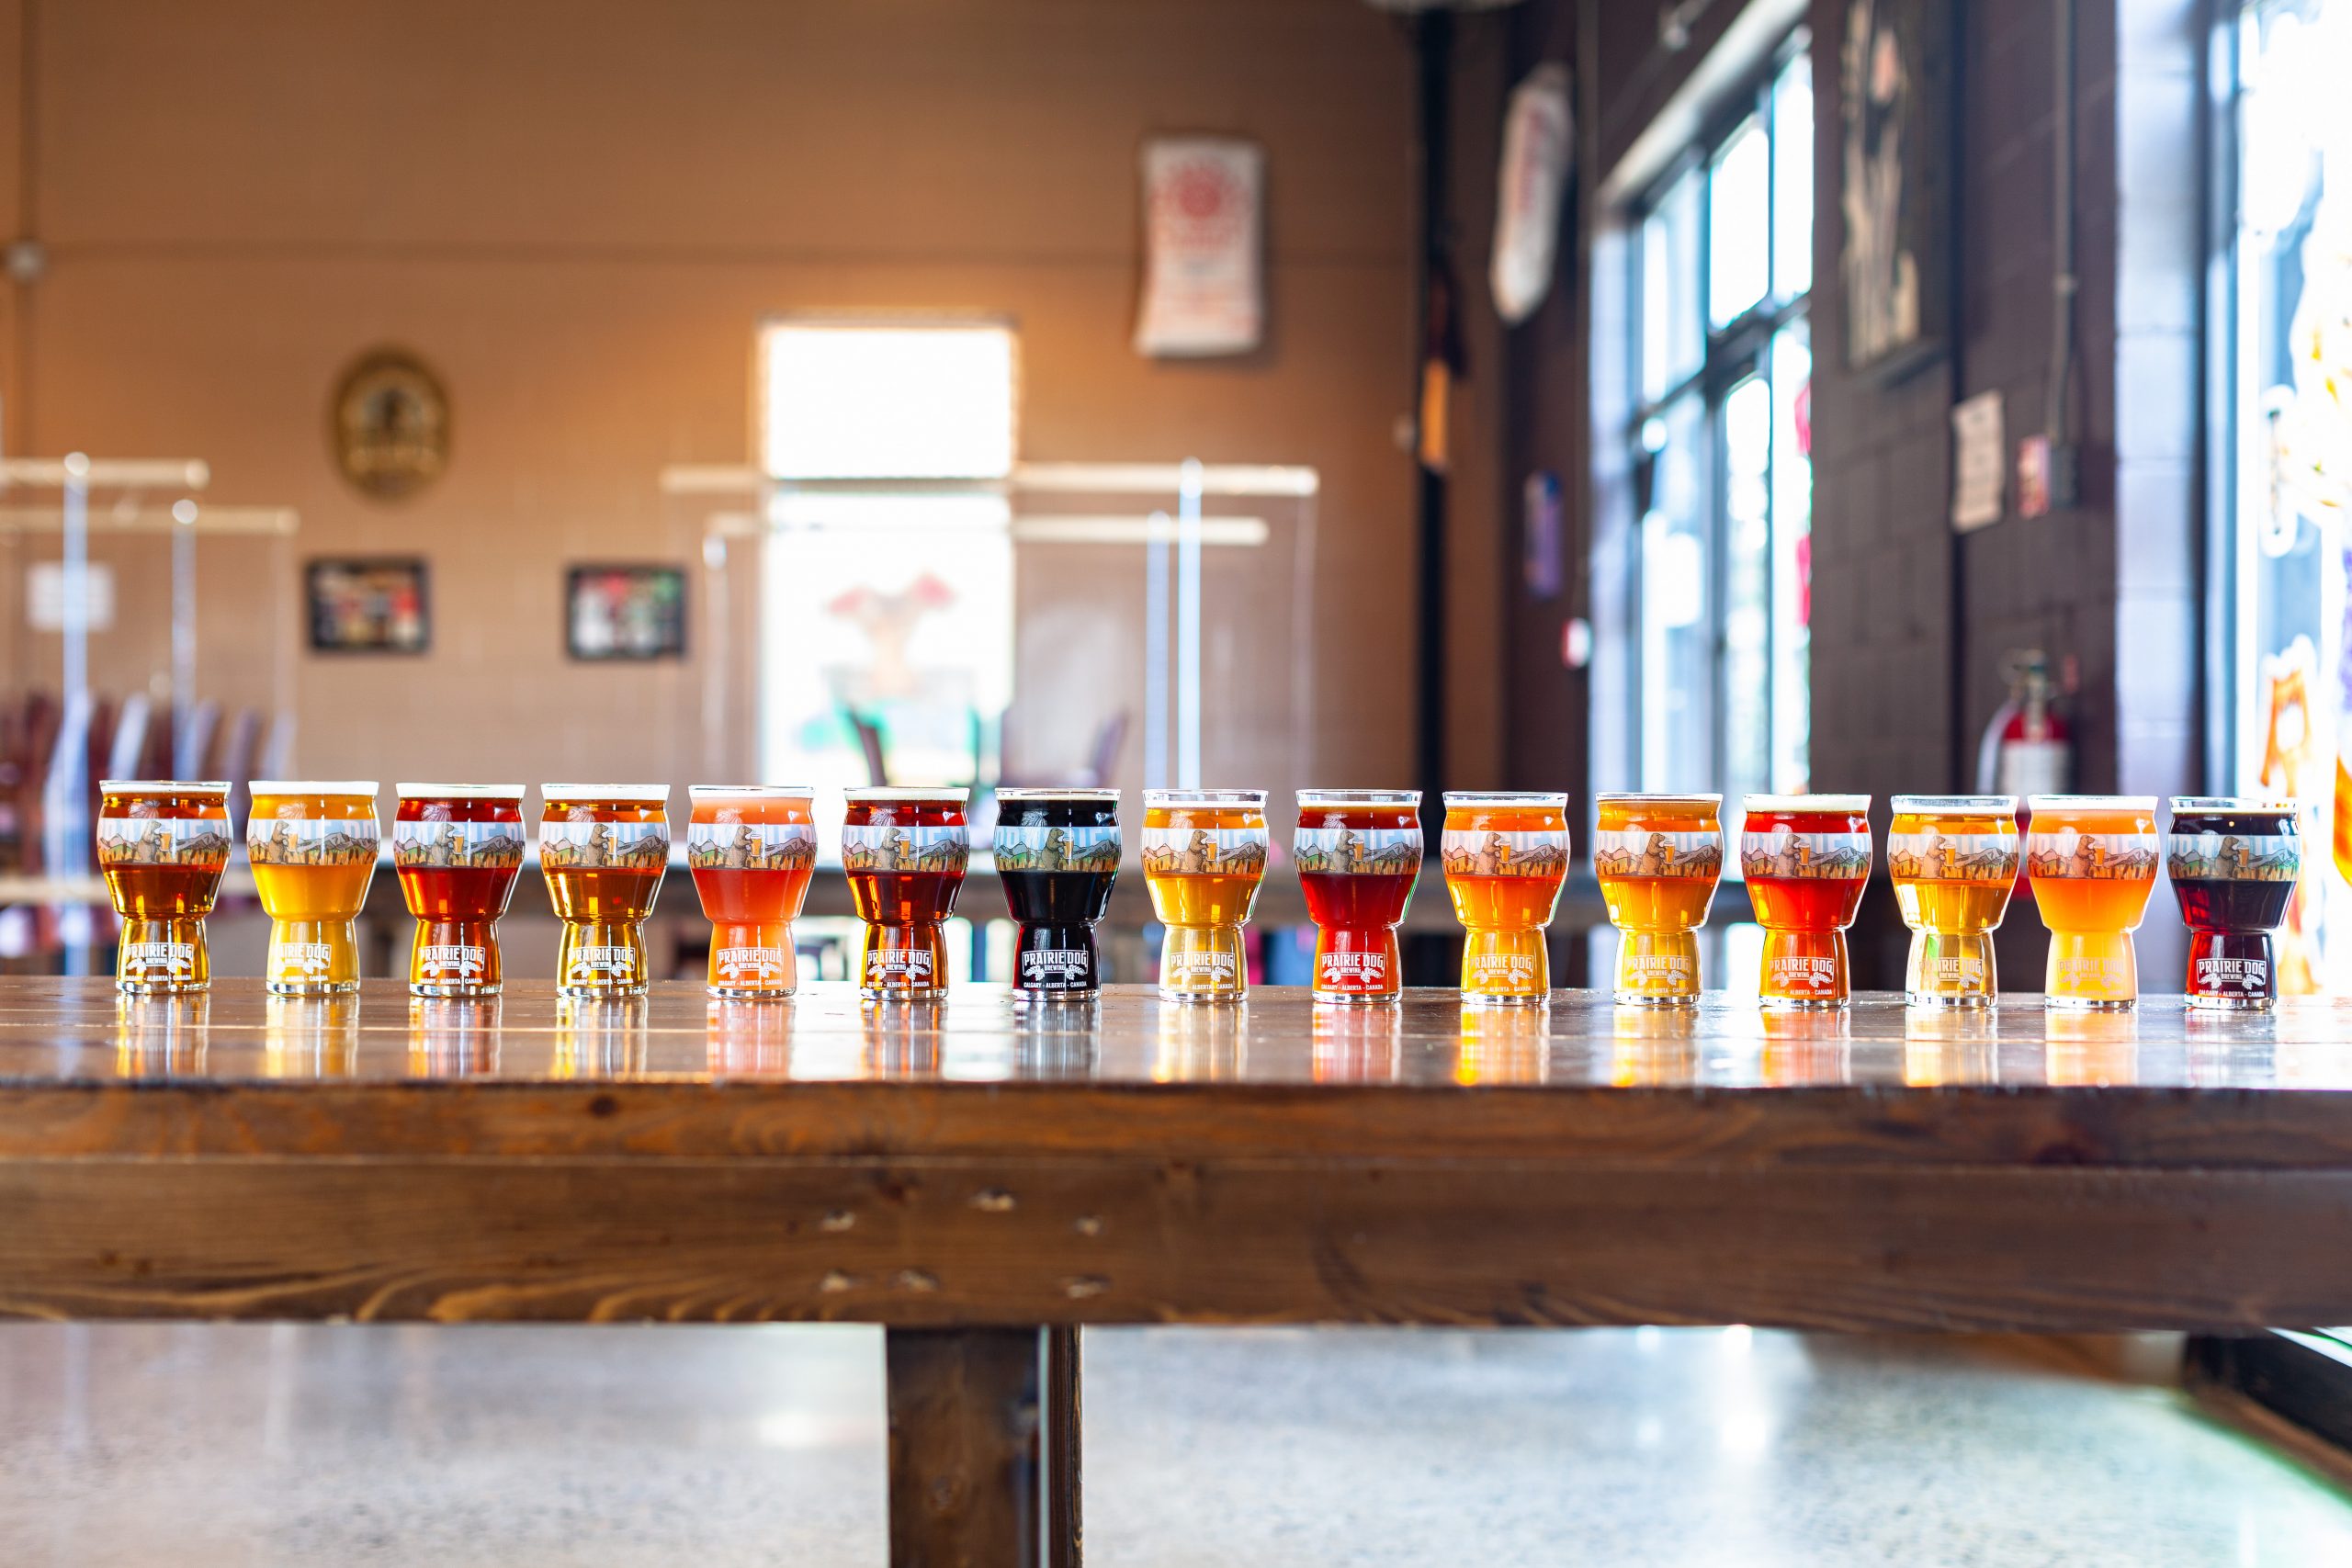 15 Prairie Dog Brewing craft beers arranged in a long row with 16-oz beer glasses.